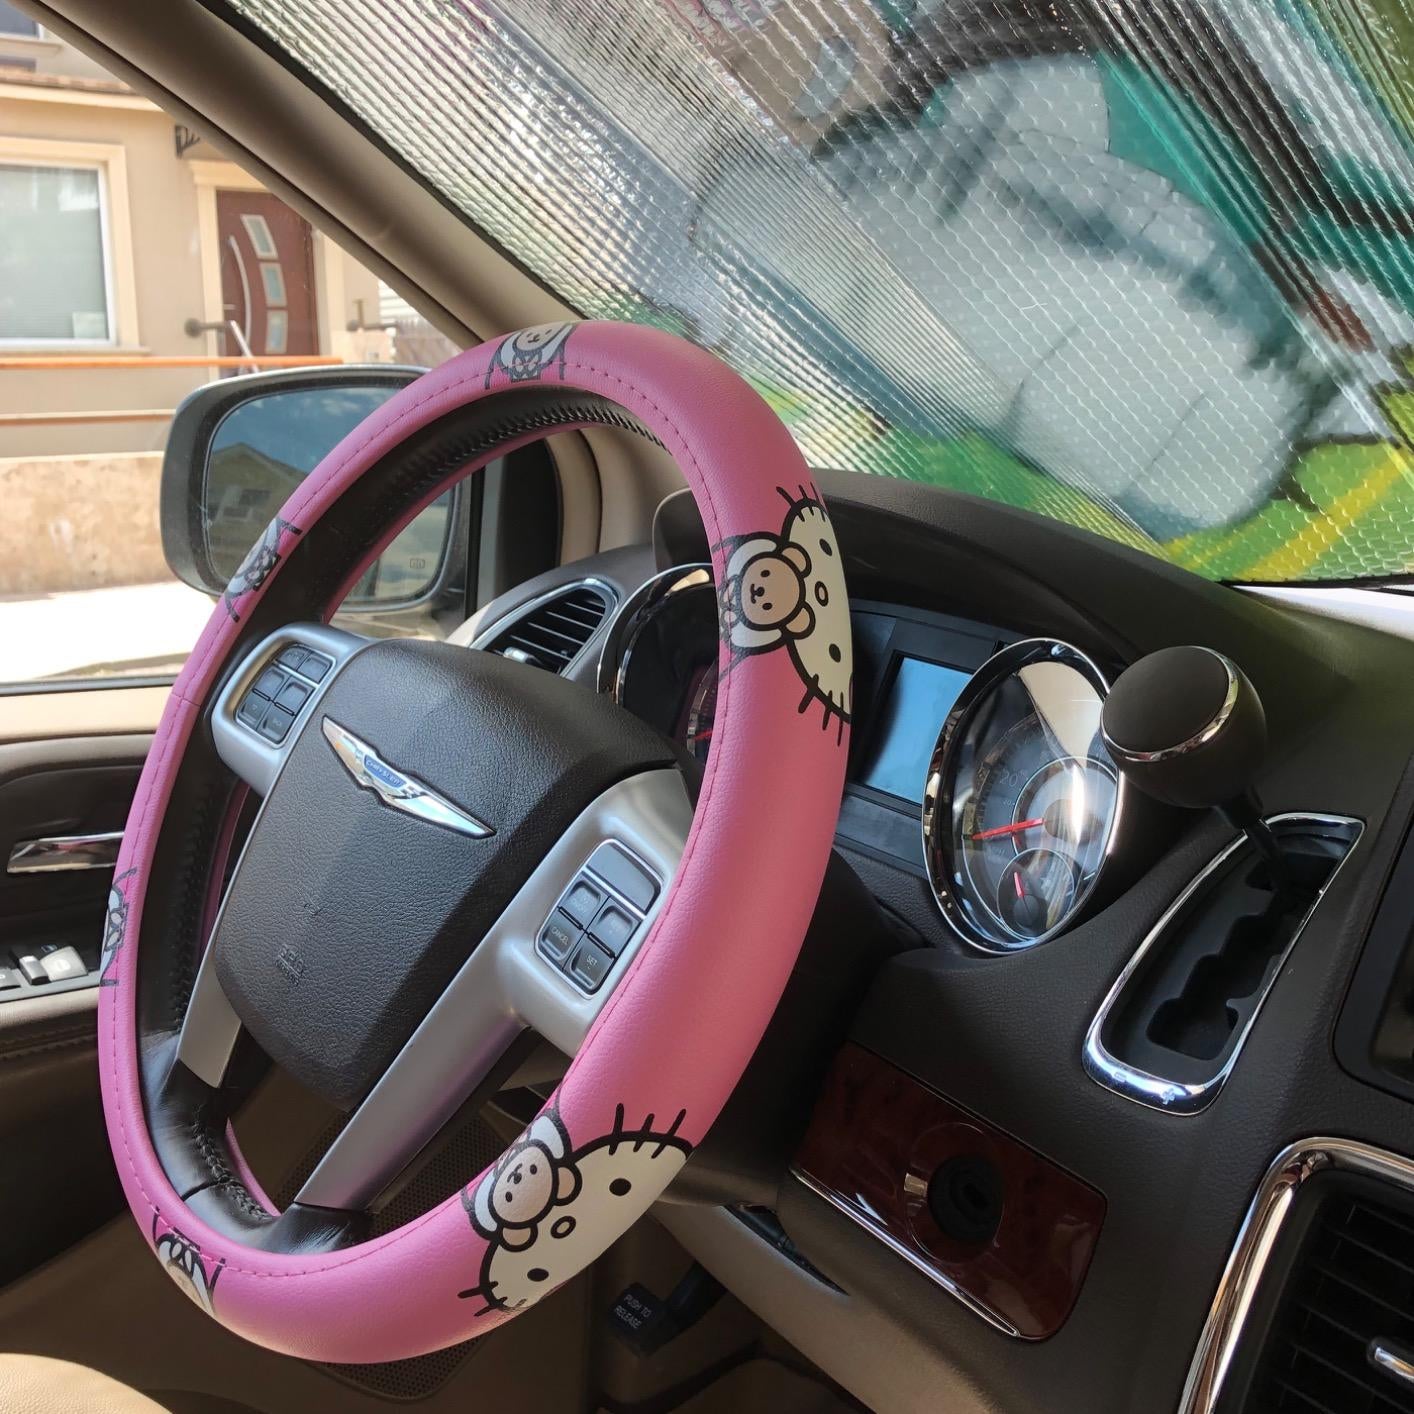 Reviewer photo of their steering wheel with the pink Hello Kitty cover